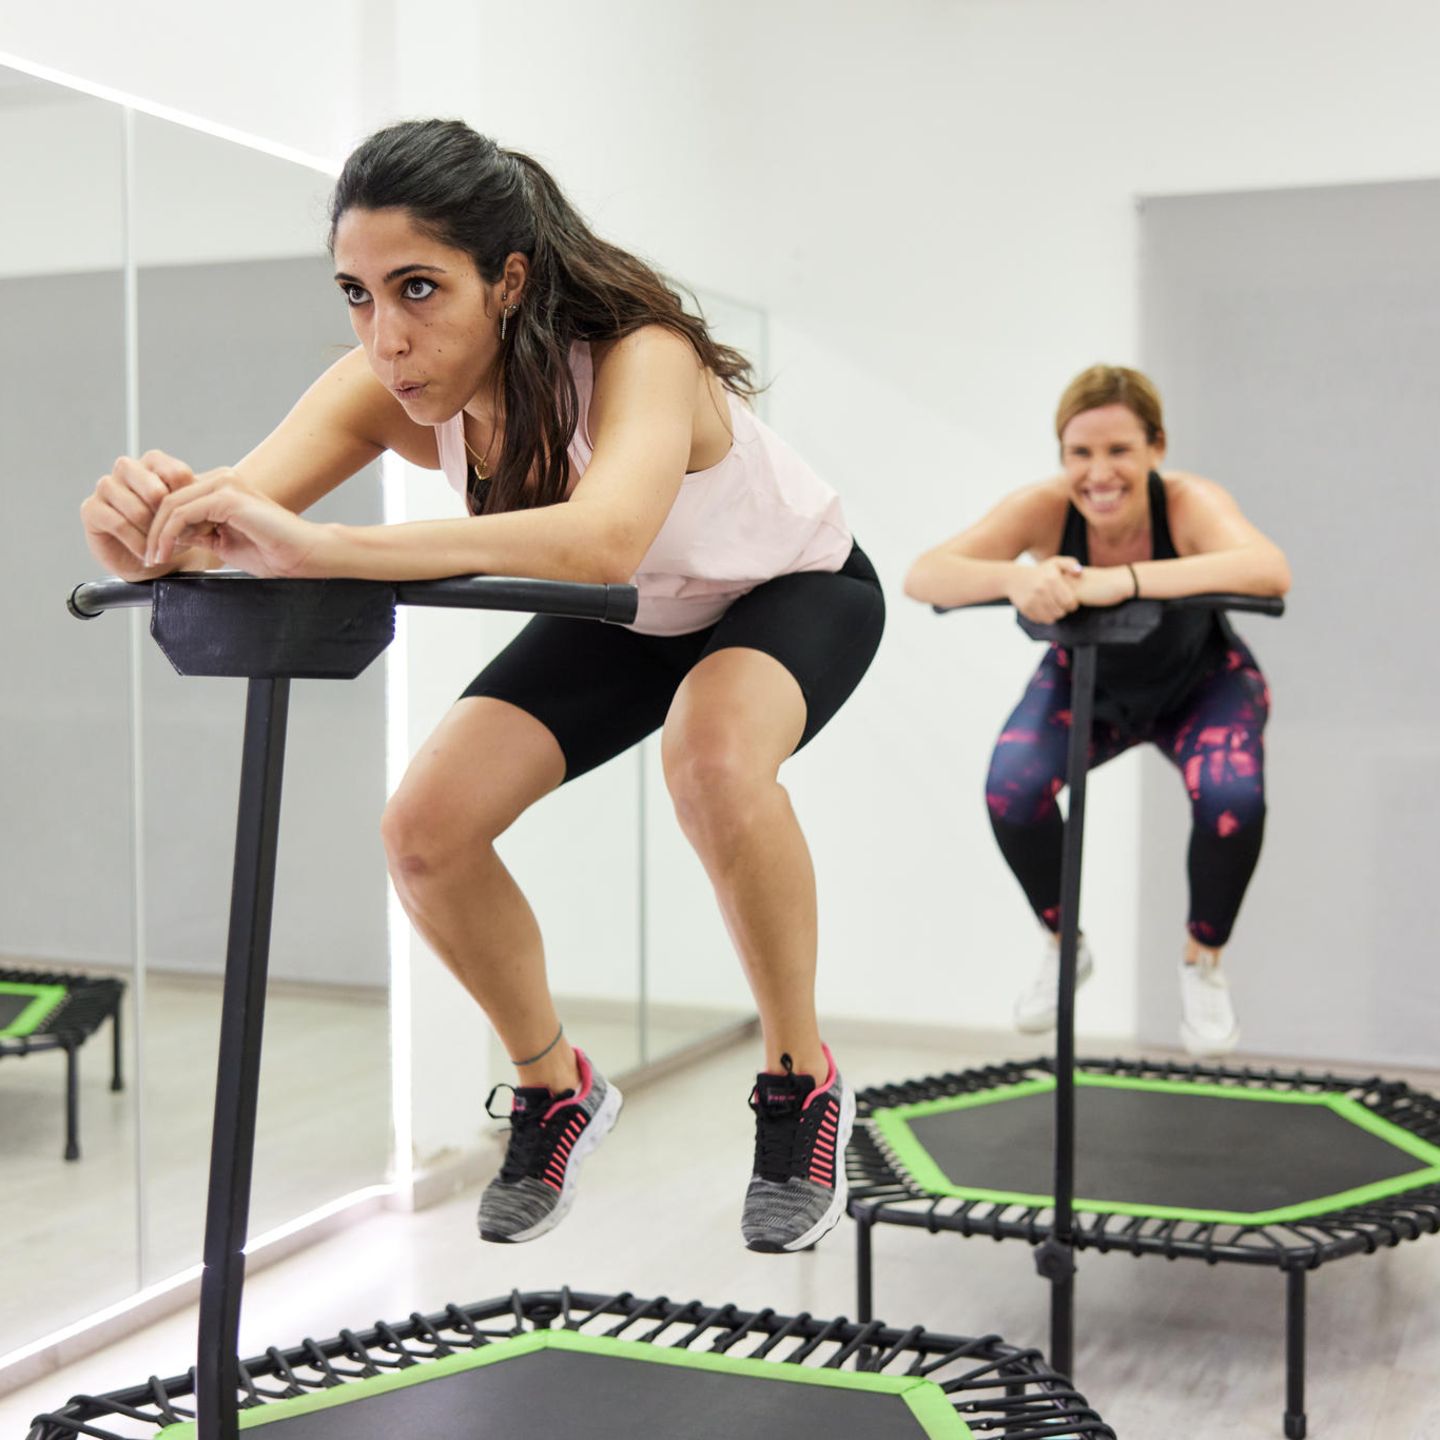 Trampolin-Workout Jumping Das Fitness: Trend-Check im